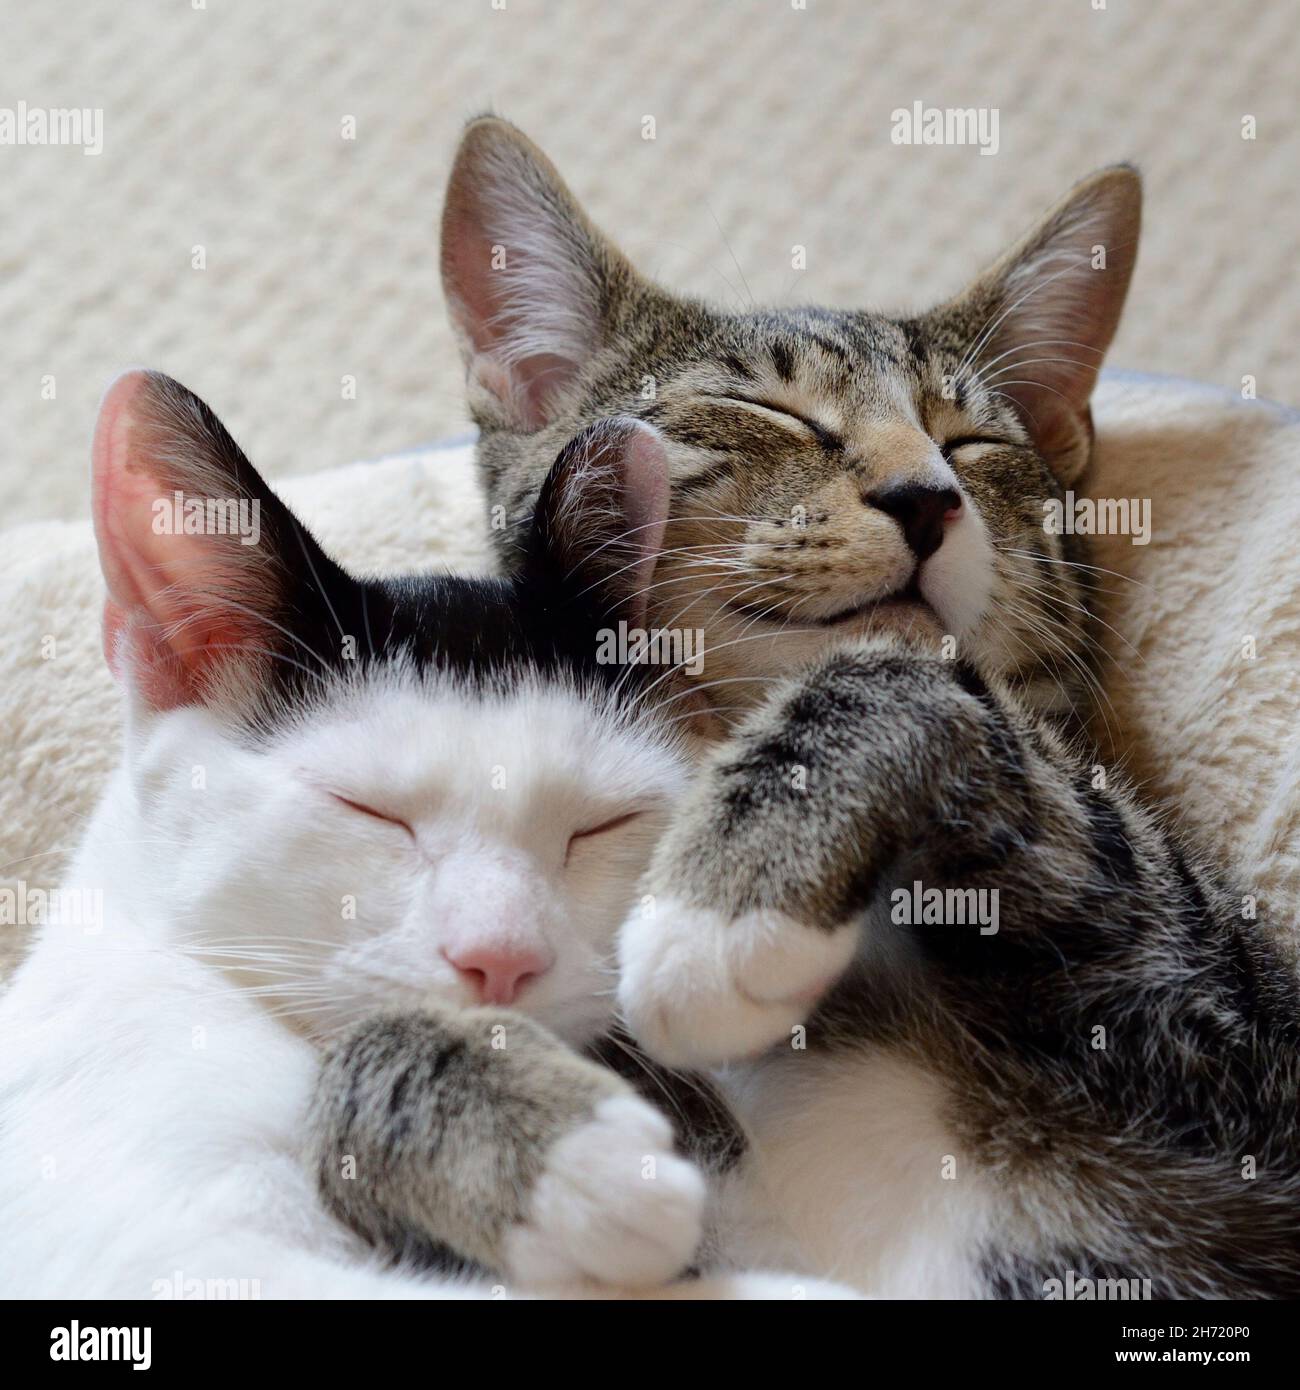 Sleeping kittens smiling in bed Stock Photo